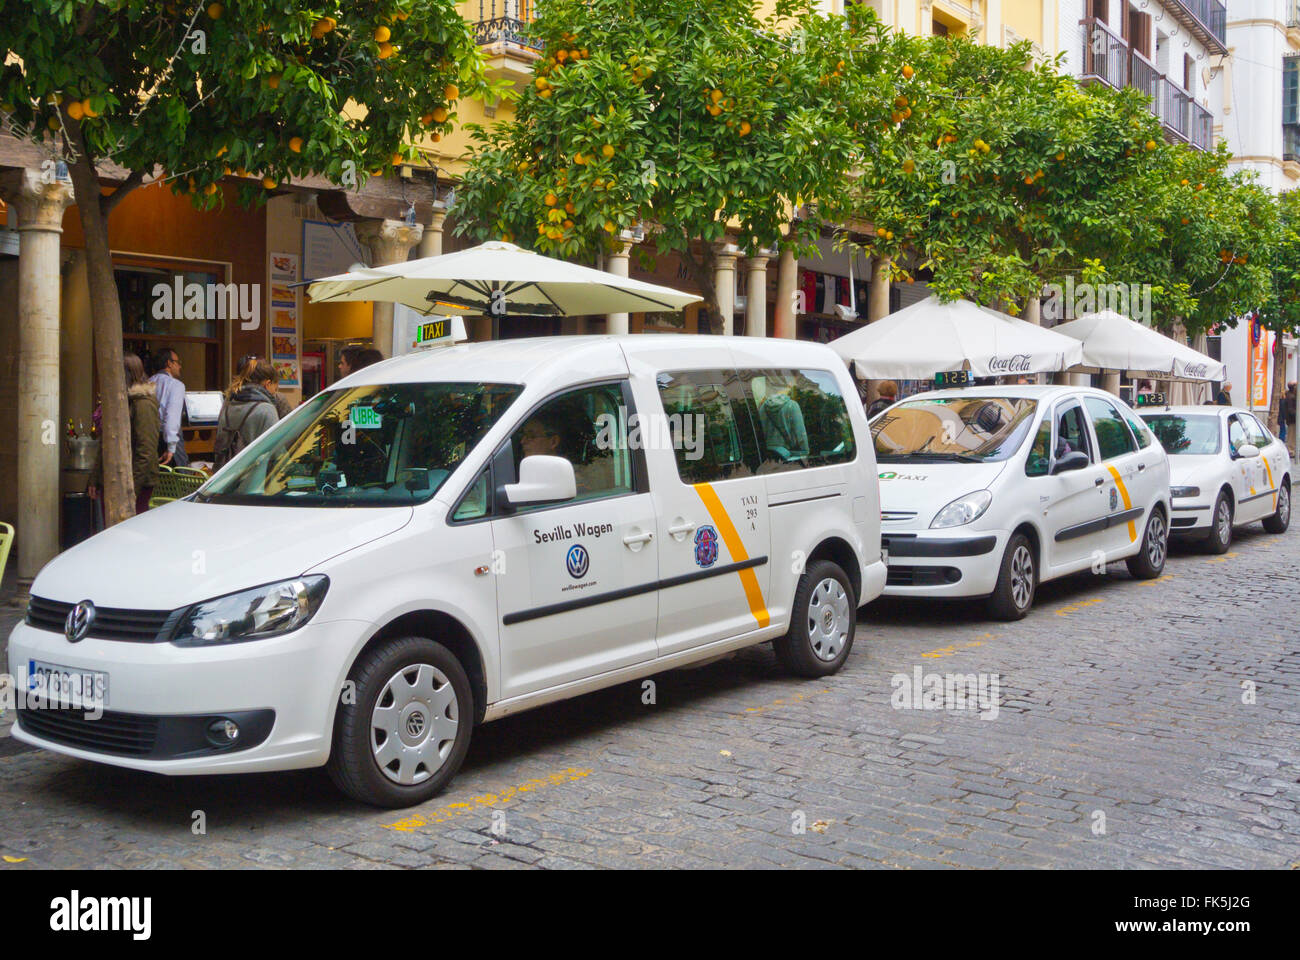 Taxi Rank Spain High Resolution Stock Photography and Images - Alamy